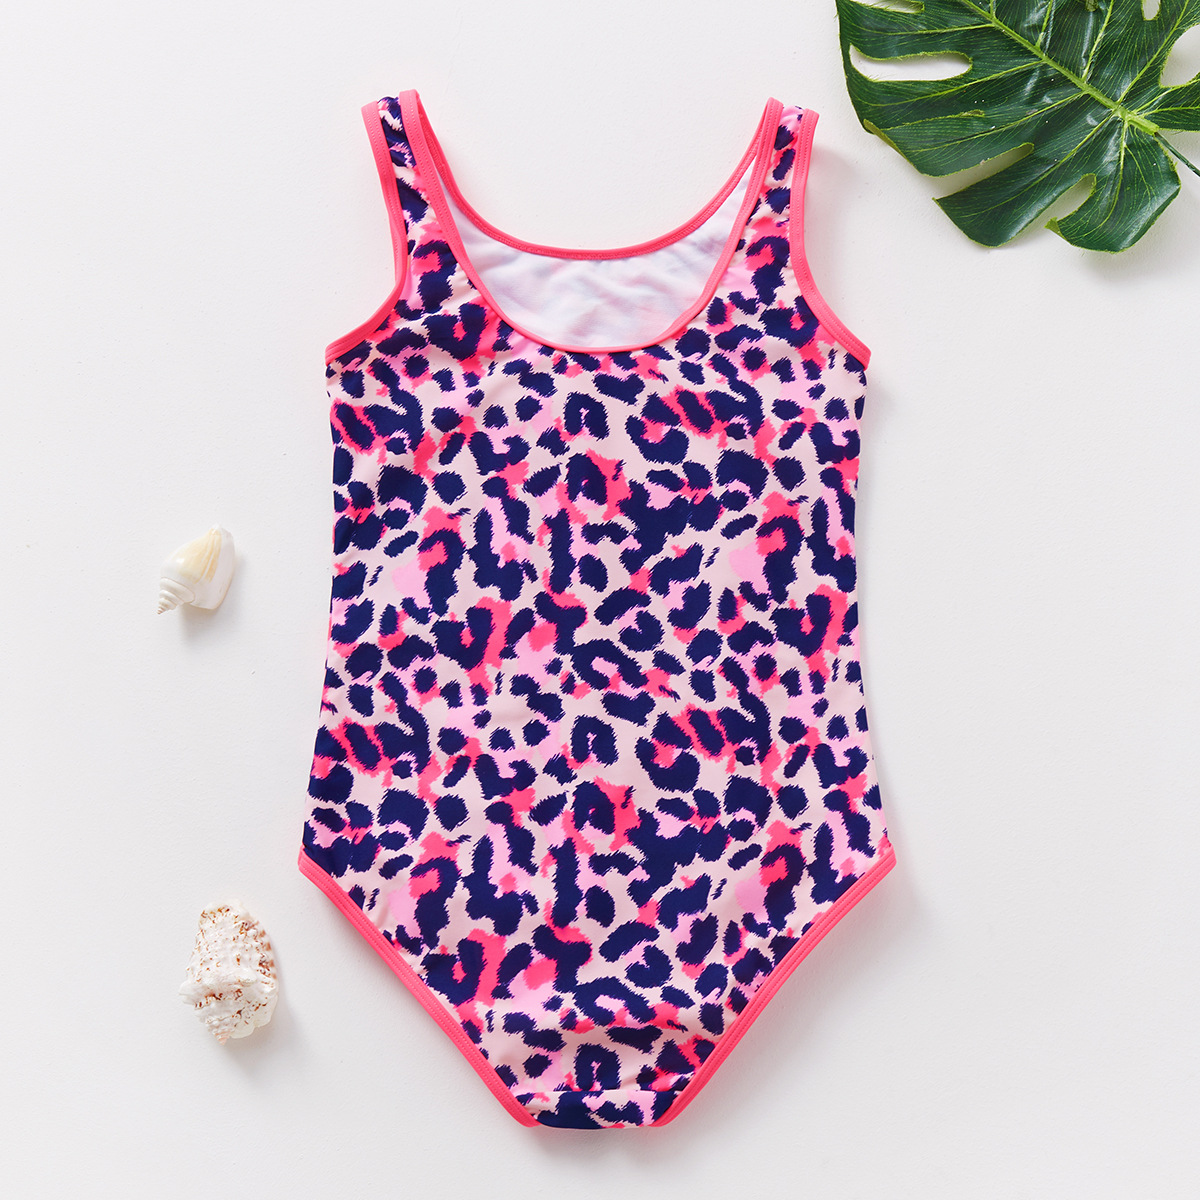 in Stock Girls' Swimsuit 5~12 Years Old Colorful Leopard Print One-Piece Swimsuit High Quality Girls' One-Piece Swimsuit